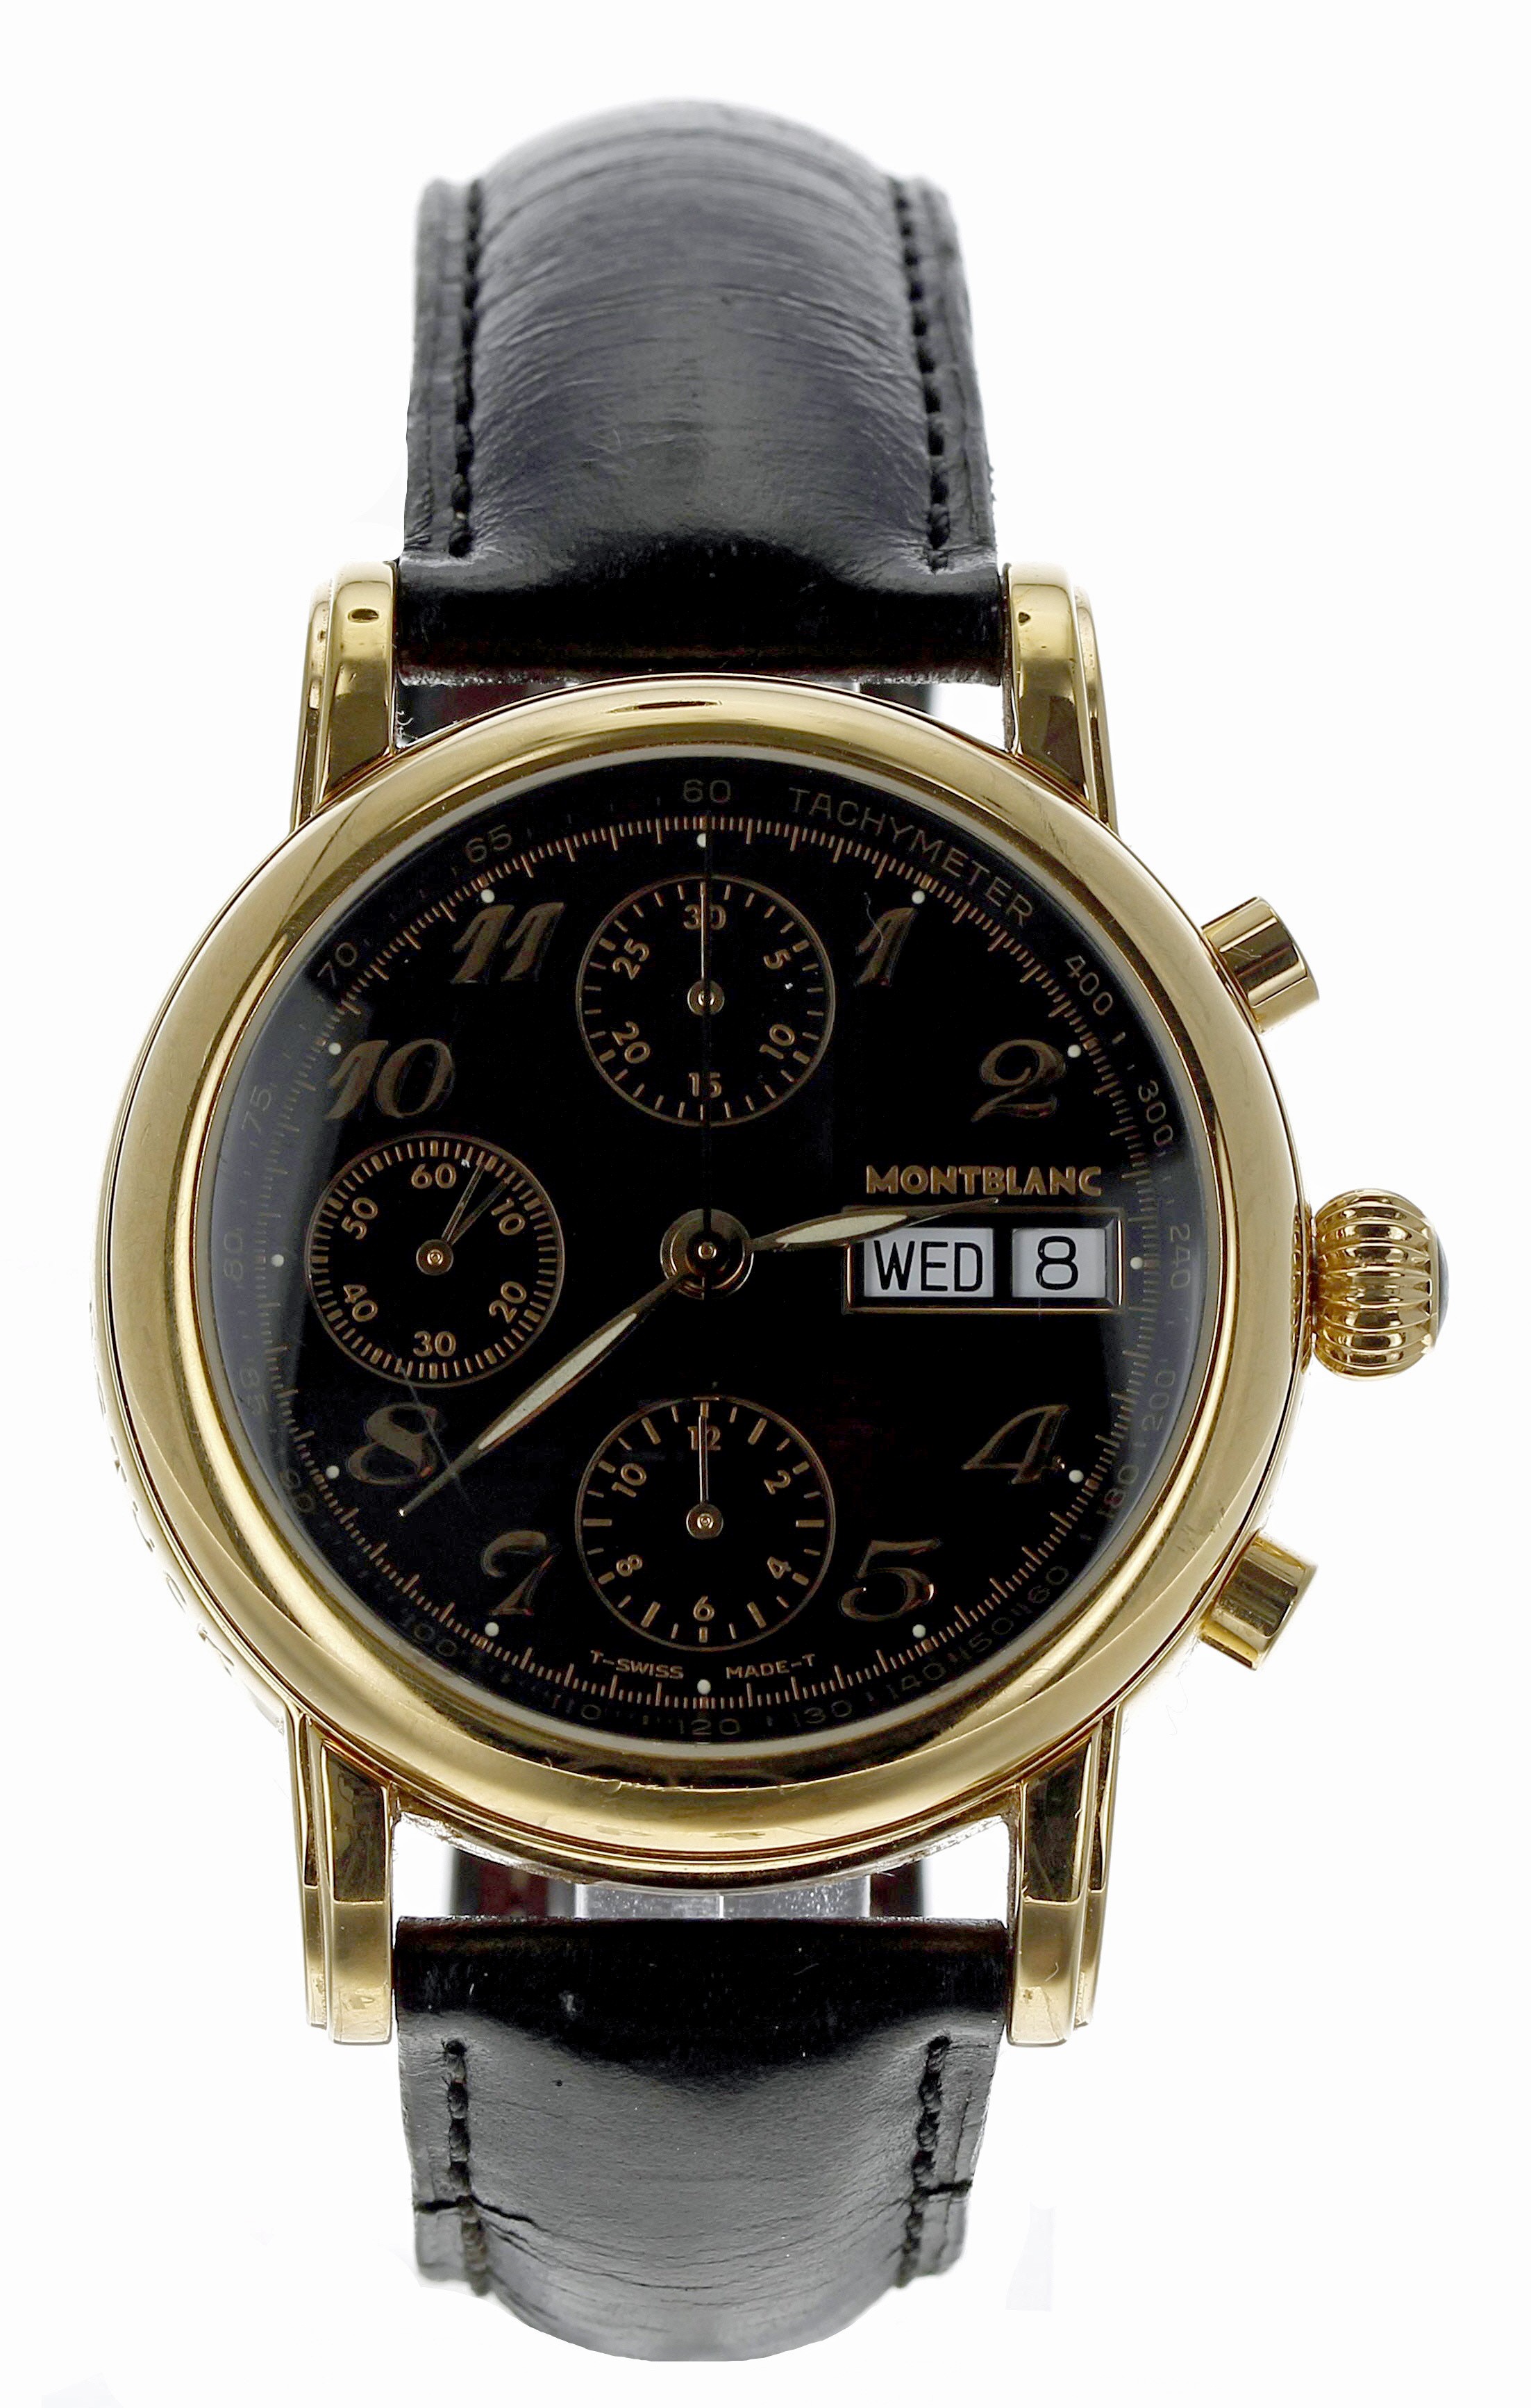 MontBlanc Meisterstuck Chronograph automatic gold plated gentleman's wristwatch, reference no. 7001,